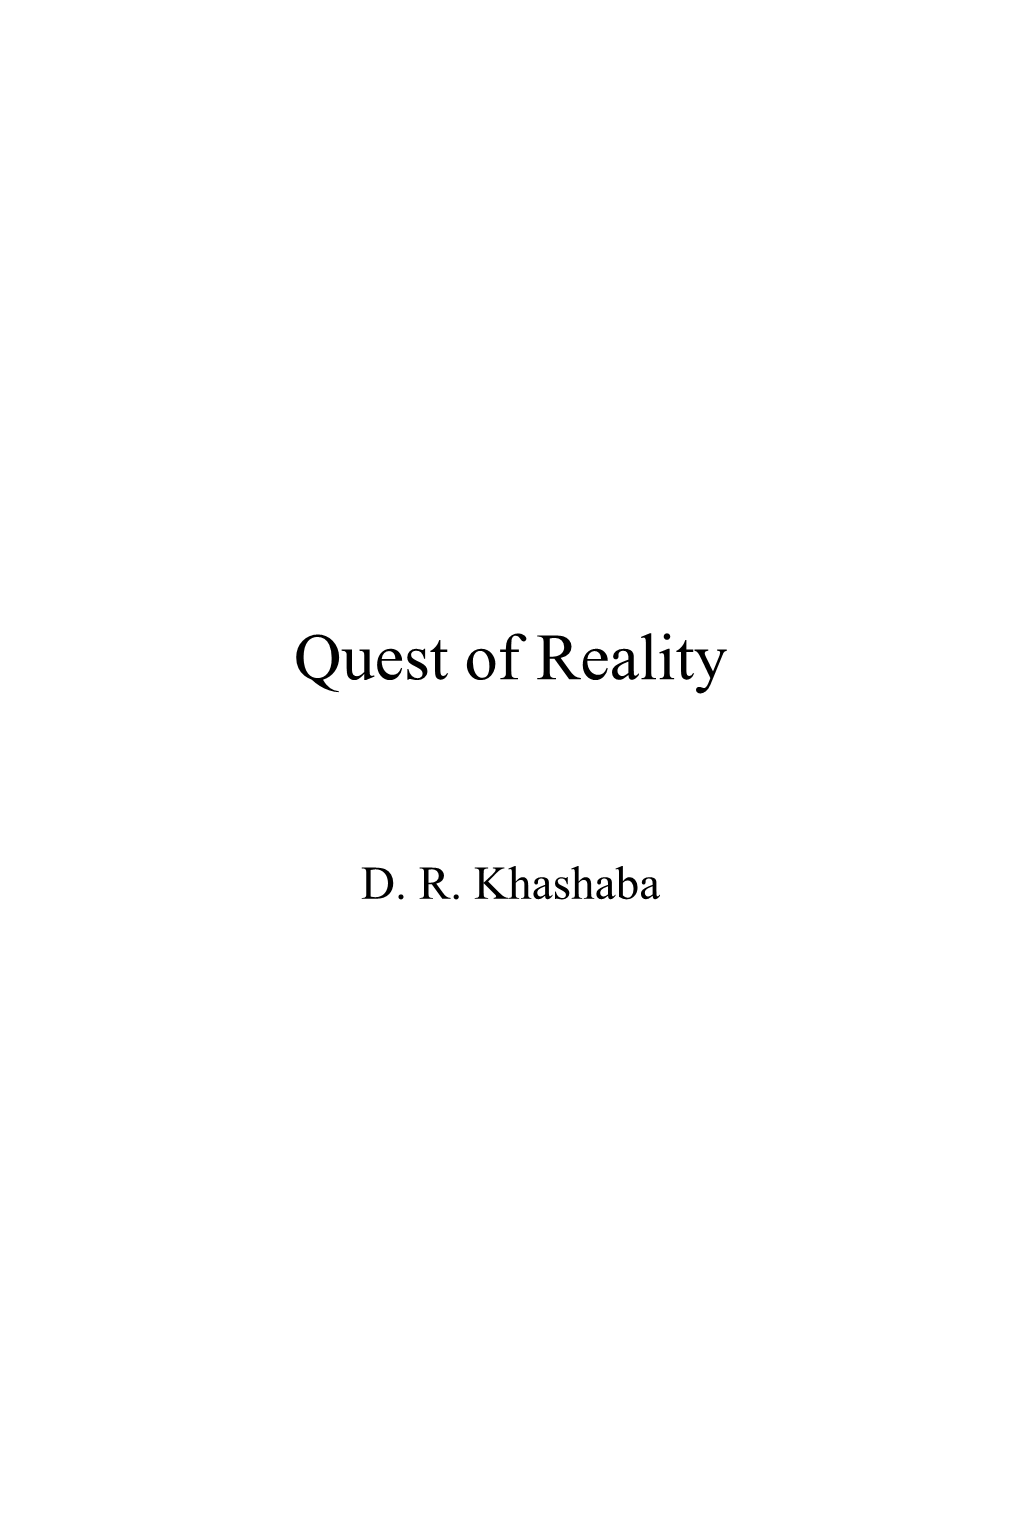 Quest of Reality